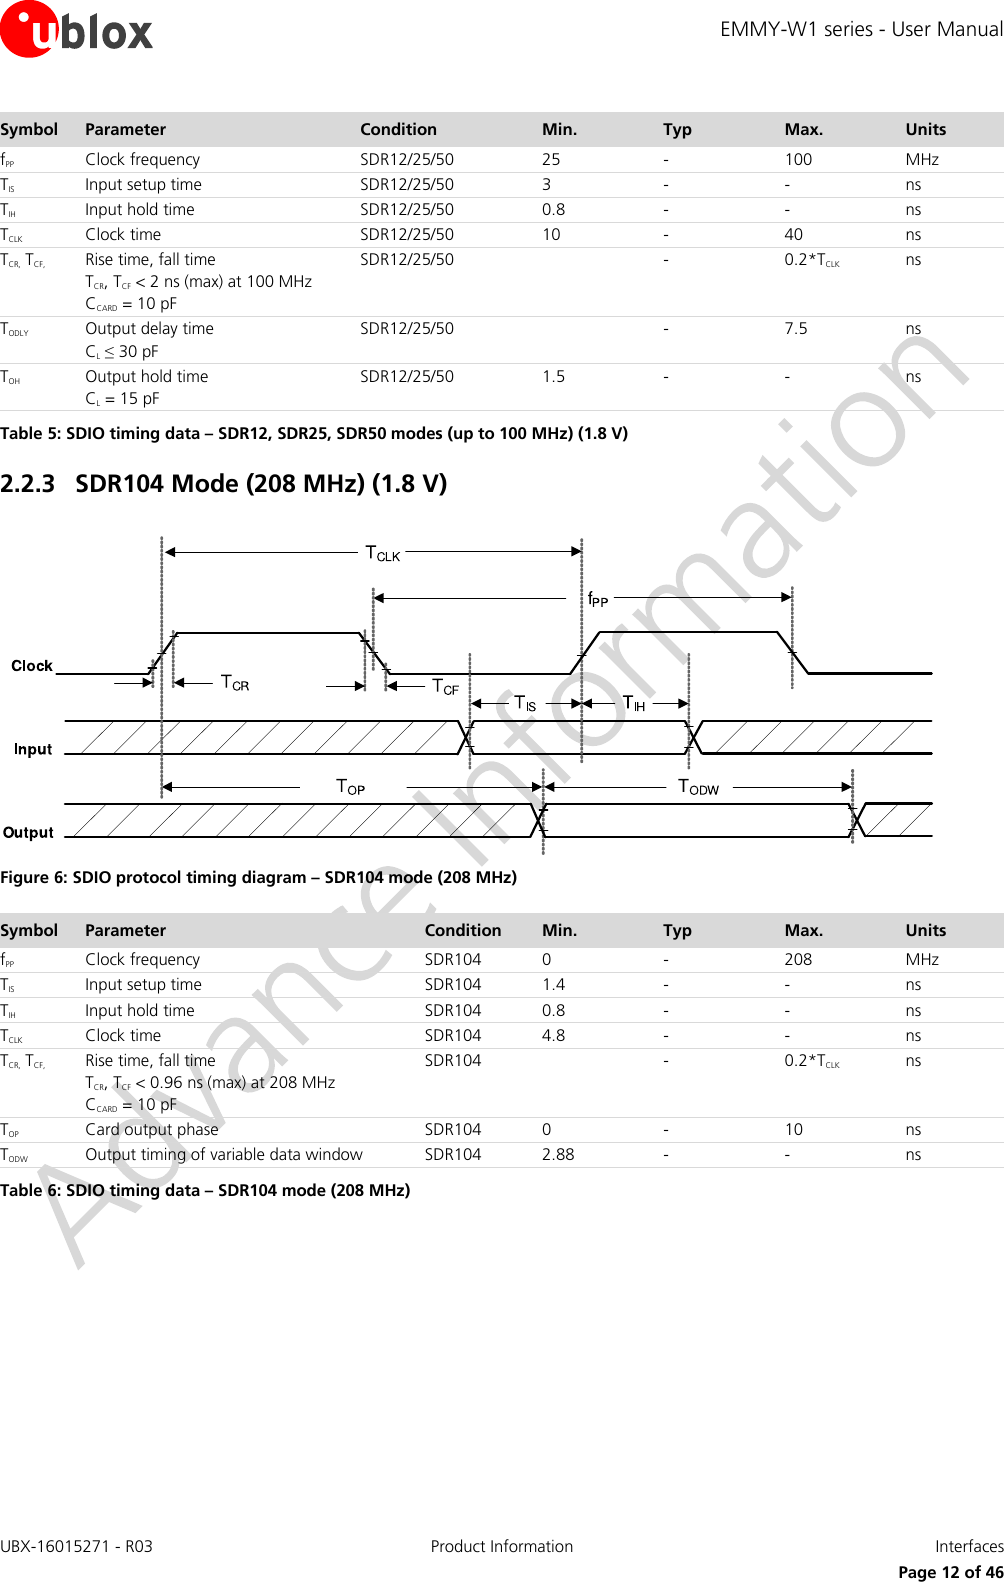 EMMY-W1 series - User Manual UBX-16015271 - R03 Product Information  Interfaces     Page 12 of 46 Symbol Parameter Condition Min.        Typ Max. Units fPP Clock frequency SDR12/25/50 25 - 100 MHz TIS Input setup time SDR12/25/50 3 - - ns TIH Input hold time SDR12/25/50 0.8 - - ns TCLK Clock time  SDR12/25/50 10 - 40 ns TCR,  TCF, Rise time, fall time  TCR, TCF &lt; 2 ns (max) at 100 MHz  CCARD = 10 pF SDR12/25/50  - 0.2*TCLK ns TODLY Output delay time CL ≤ 30 pF SDR12/25/50  - 7.5 ns TOH Output hold time CL = 15 pF   SDR12/25/50 1.5 - - ns Table 5: SDIO timing data – SDR12, SDR25, SDR50 modes (up to 100 MHz) (1.8 V) 2.2.3 SDR104 Mode (208 MHz) (1.8 V)   Figure 6: SDIO protocol timing diagram – SDR104 mode (208 MHz) Symbol Parameter Condition Min.        Typ Max. Units fPP Clock frequency SDR104 0 - 208 MHz TIS Input setup time SDR104 1.4 - - ns TIH Input hold time SDR104 0.8 - - ns TCLK Clock time  SDR104 4.8 - - ns TCR,  TCF, Rise time, fall time  TCR, TCF &lt; 0.96 ns (max) at 208 MHz  CCARD = 10 pF SDR104  - 0.2*TCLK ns TOP Card output phase SDR104 0 - 10 ns TODW Output timing of variable data window   SDR104 2.88 - - ns Table 6: SDIO timing data – SDR104 mode (208 MHz) 